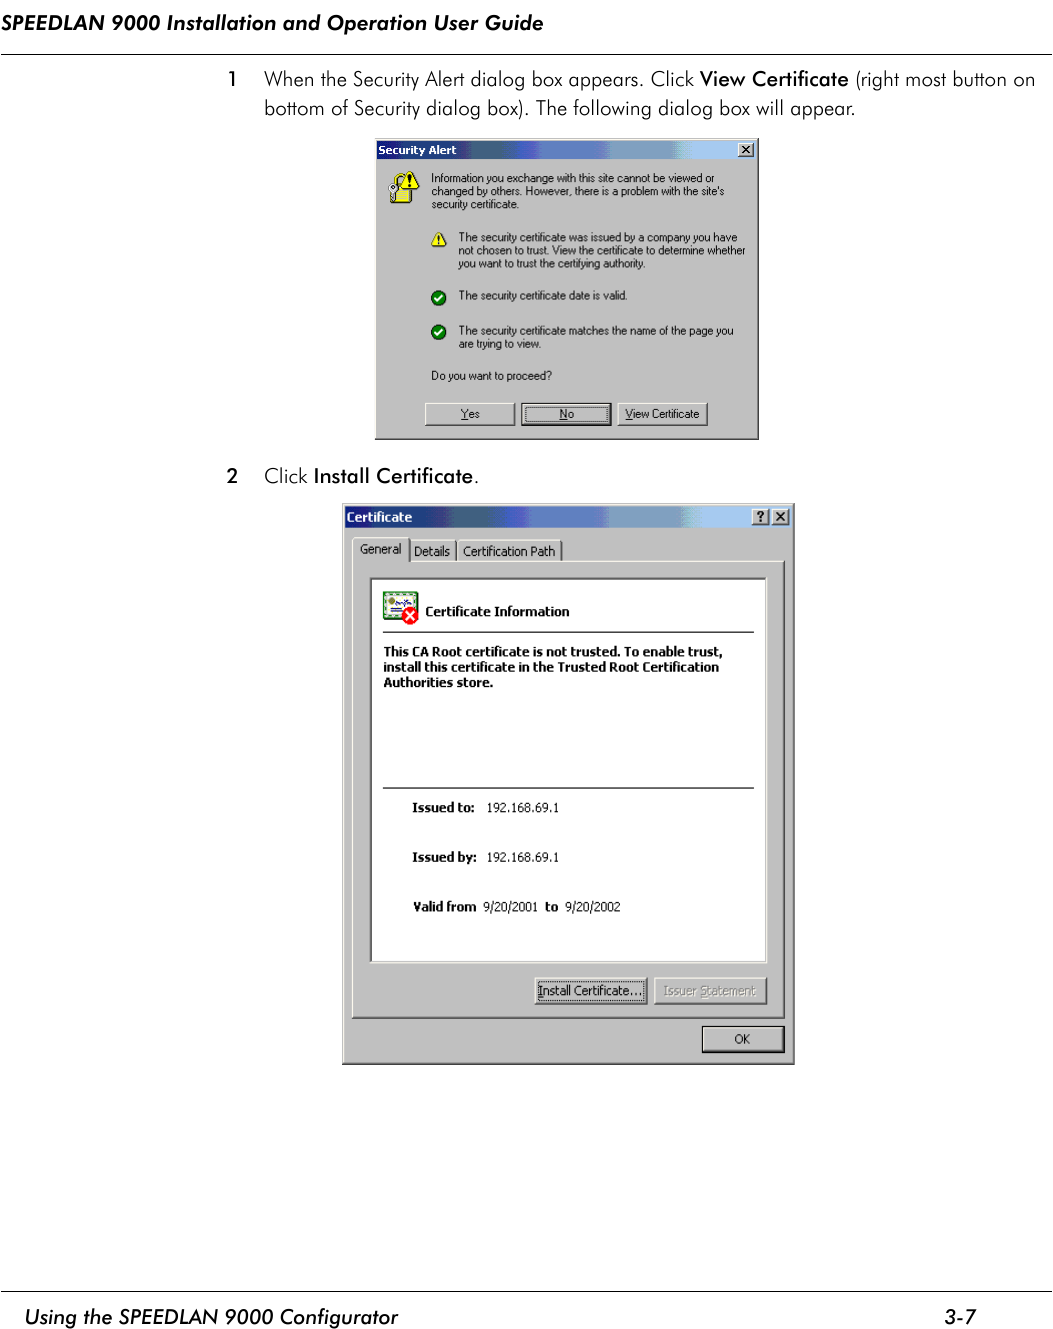 SPEEDLAN 9000 Installation and Operation User Guide     Using the SPEEDLAN 9000 Configurator 3-7                                                                                                                                                              1When the Security Alert dialog box appears. Click View Certificate (right most button on bottom of Security dialog box). The following dialog box will appear.2Click Install Certificate. 